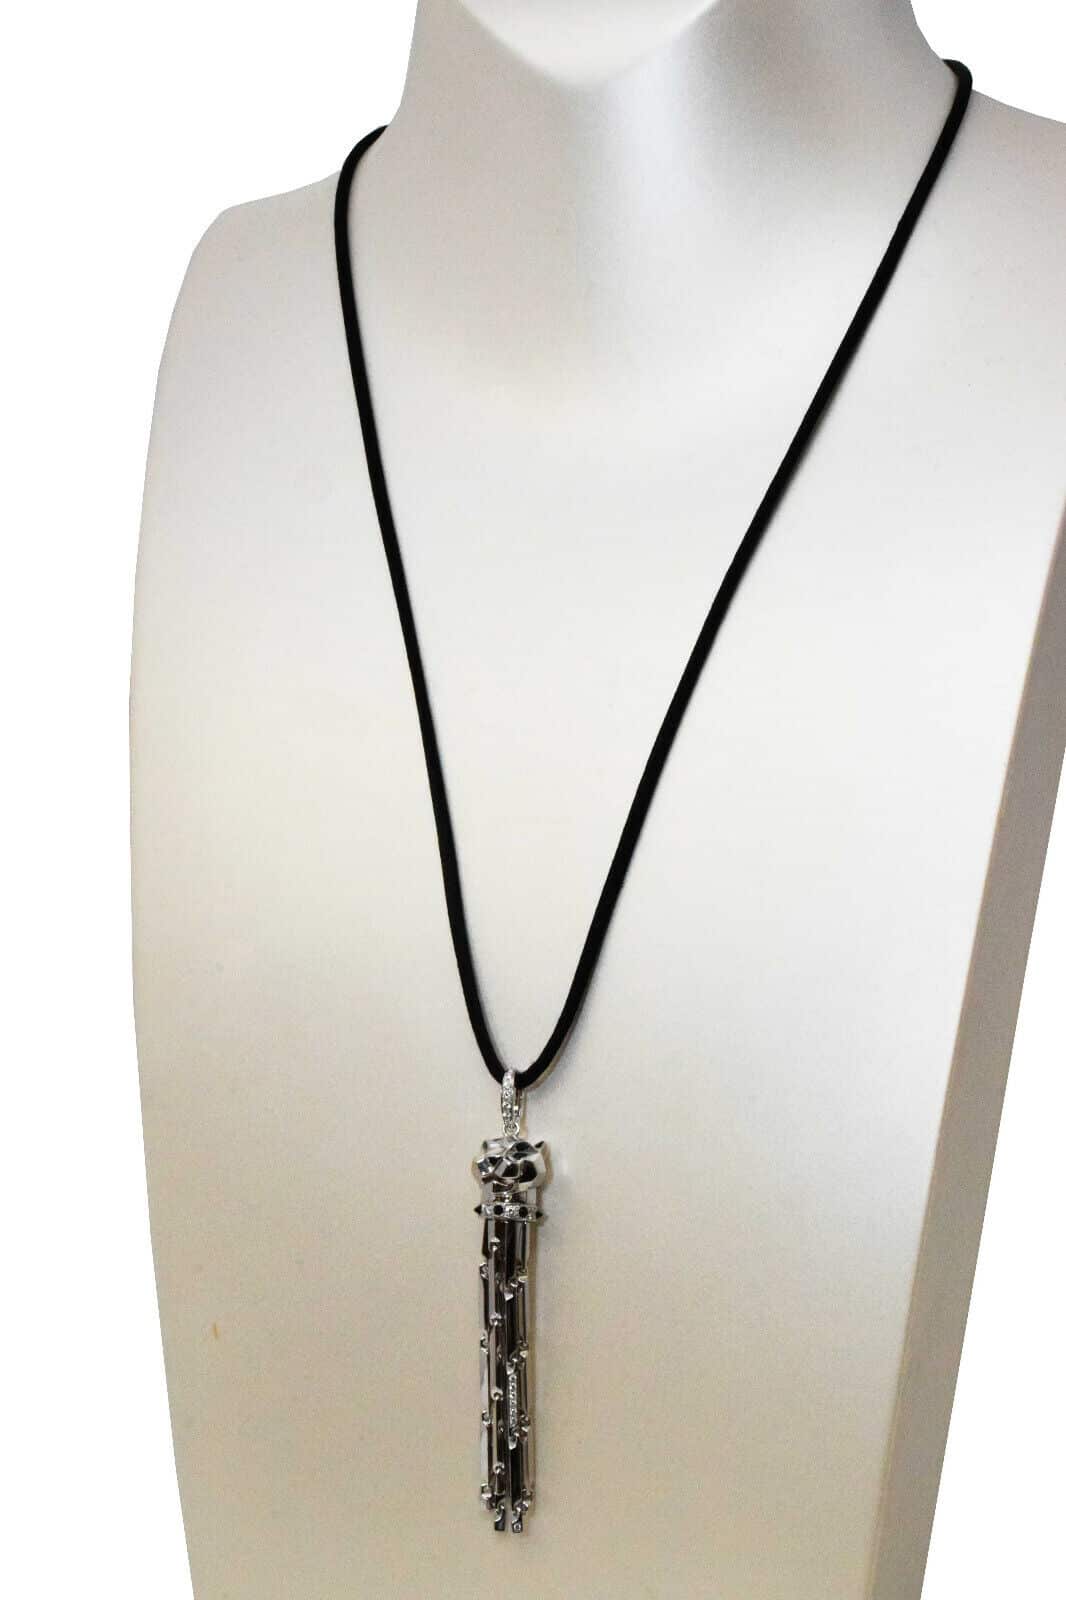 RazOrblade Love neckLace online July 31st!! 100% Aged StainLess